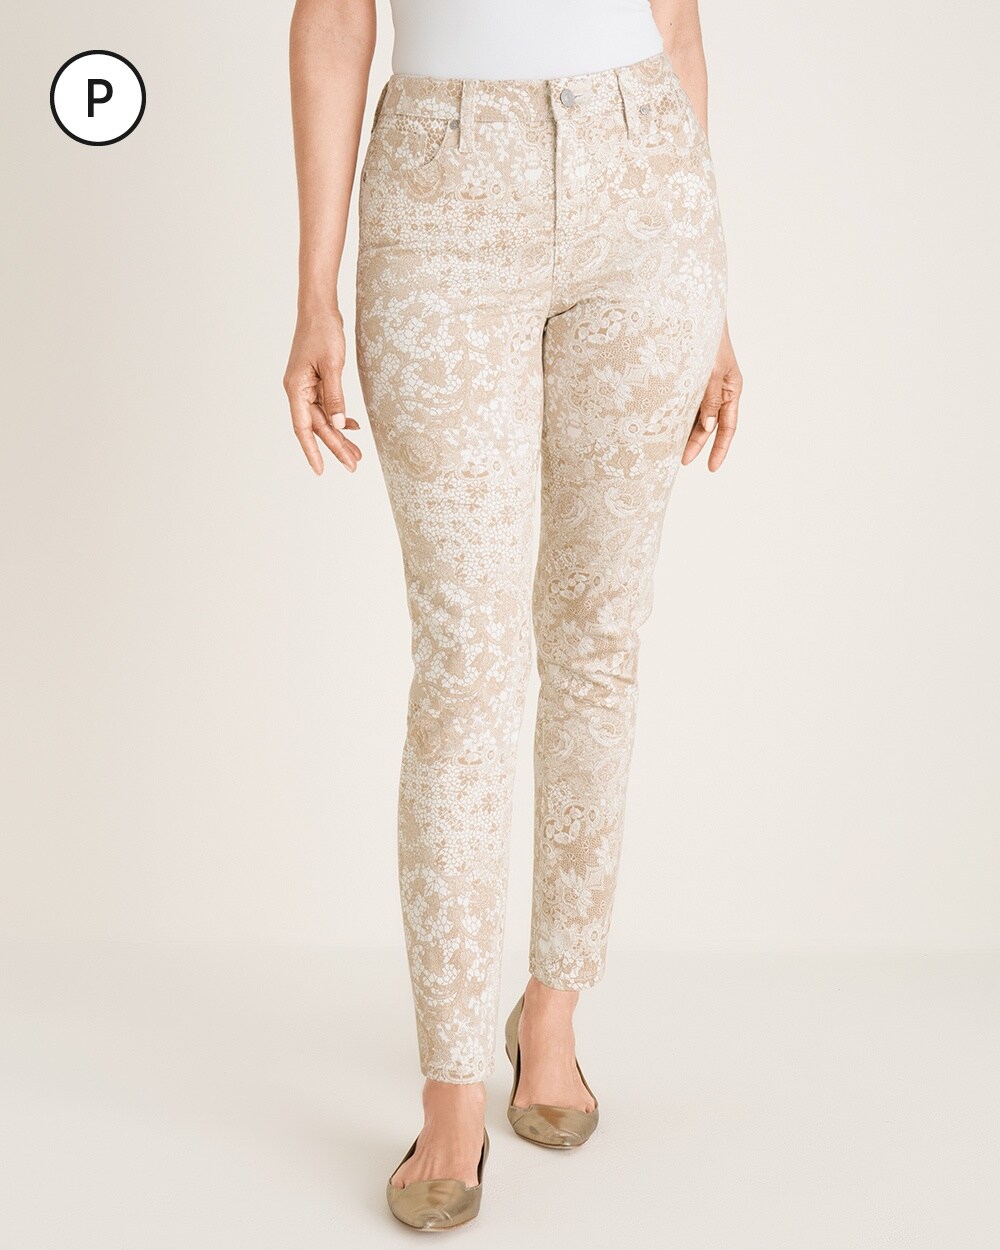 So Slimming Petite Lace-Print Girlfriend Ankle Jeans